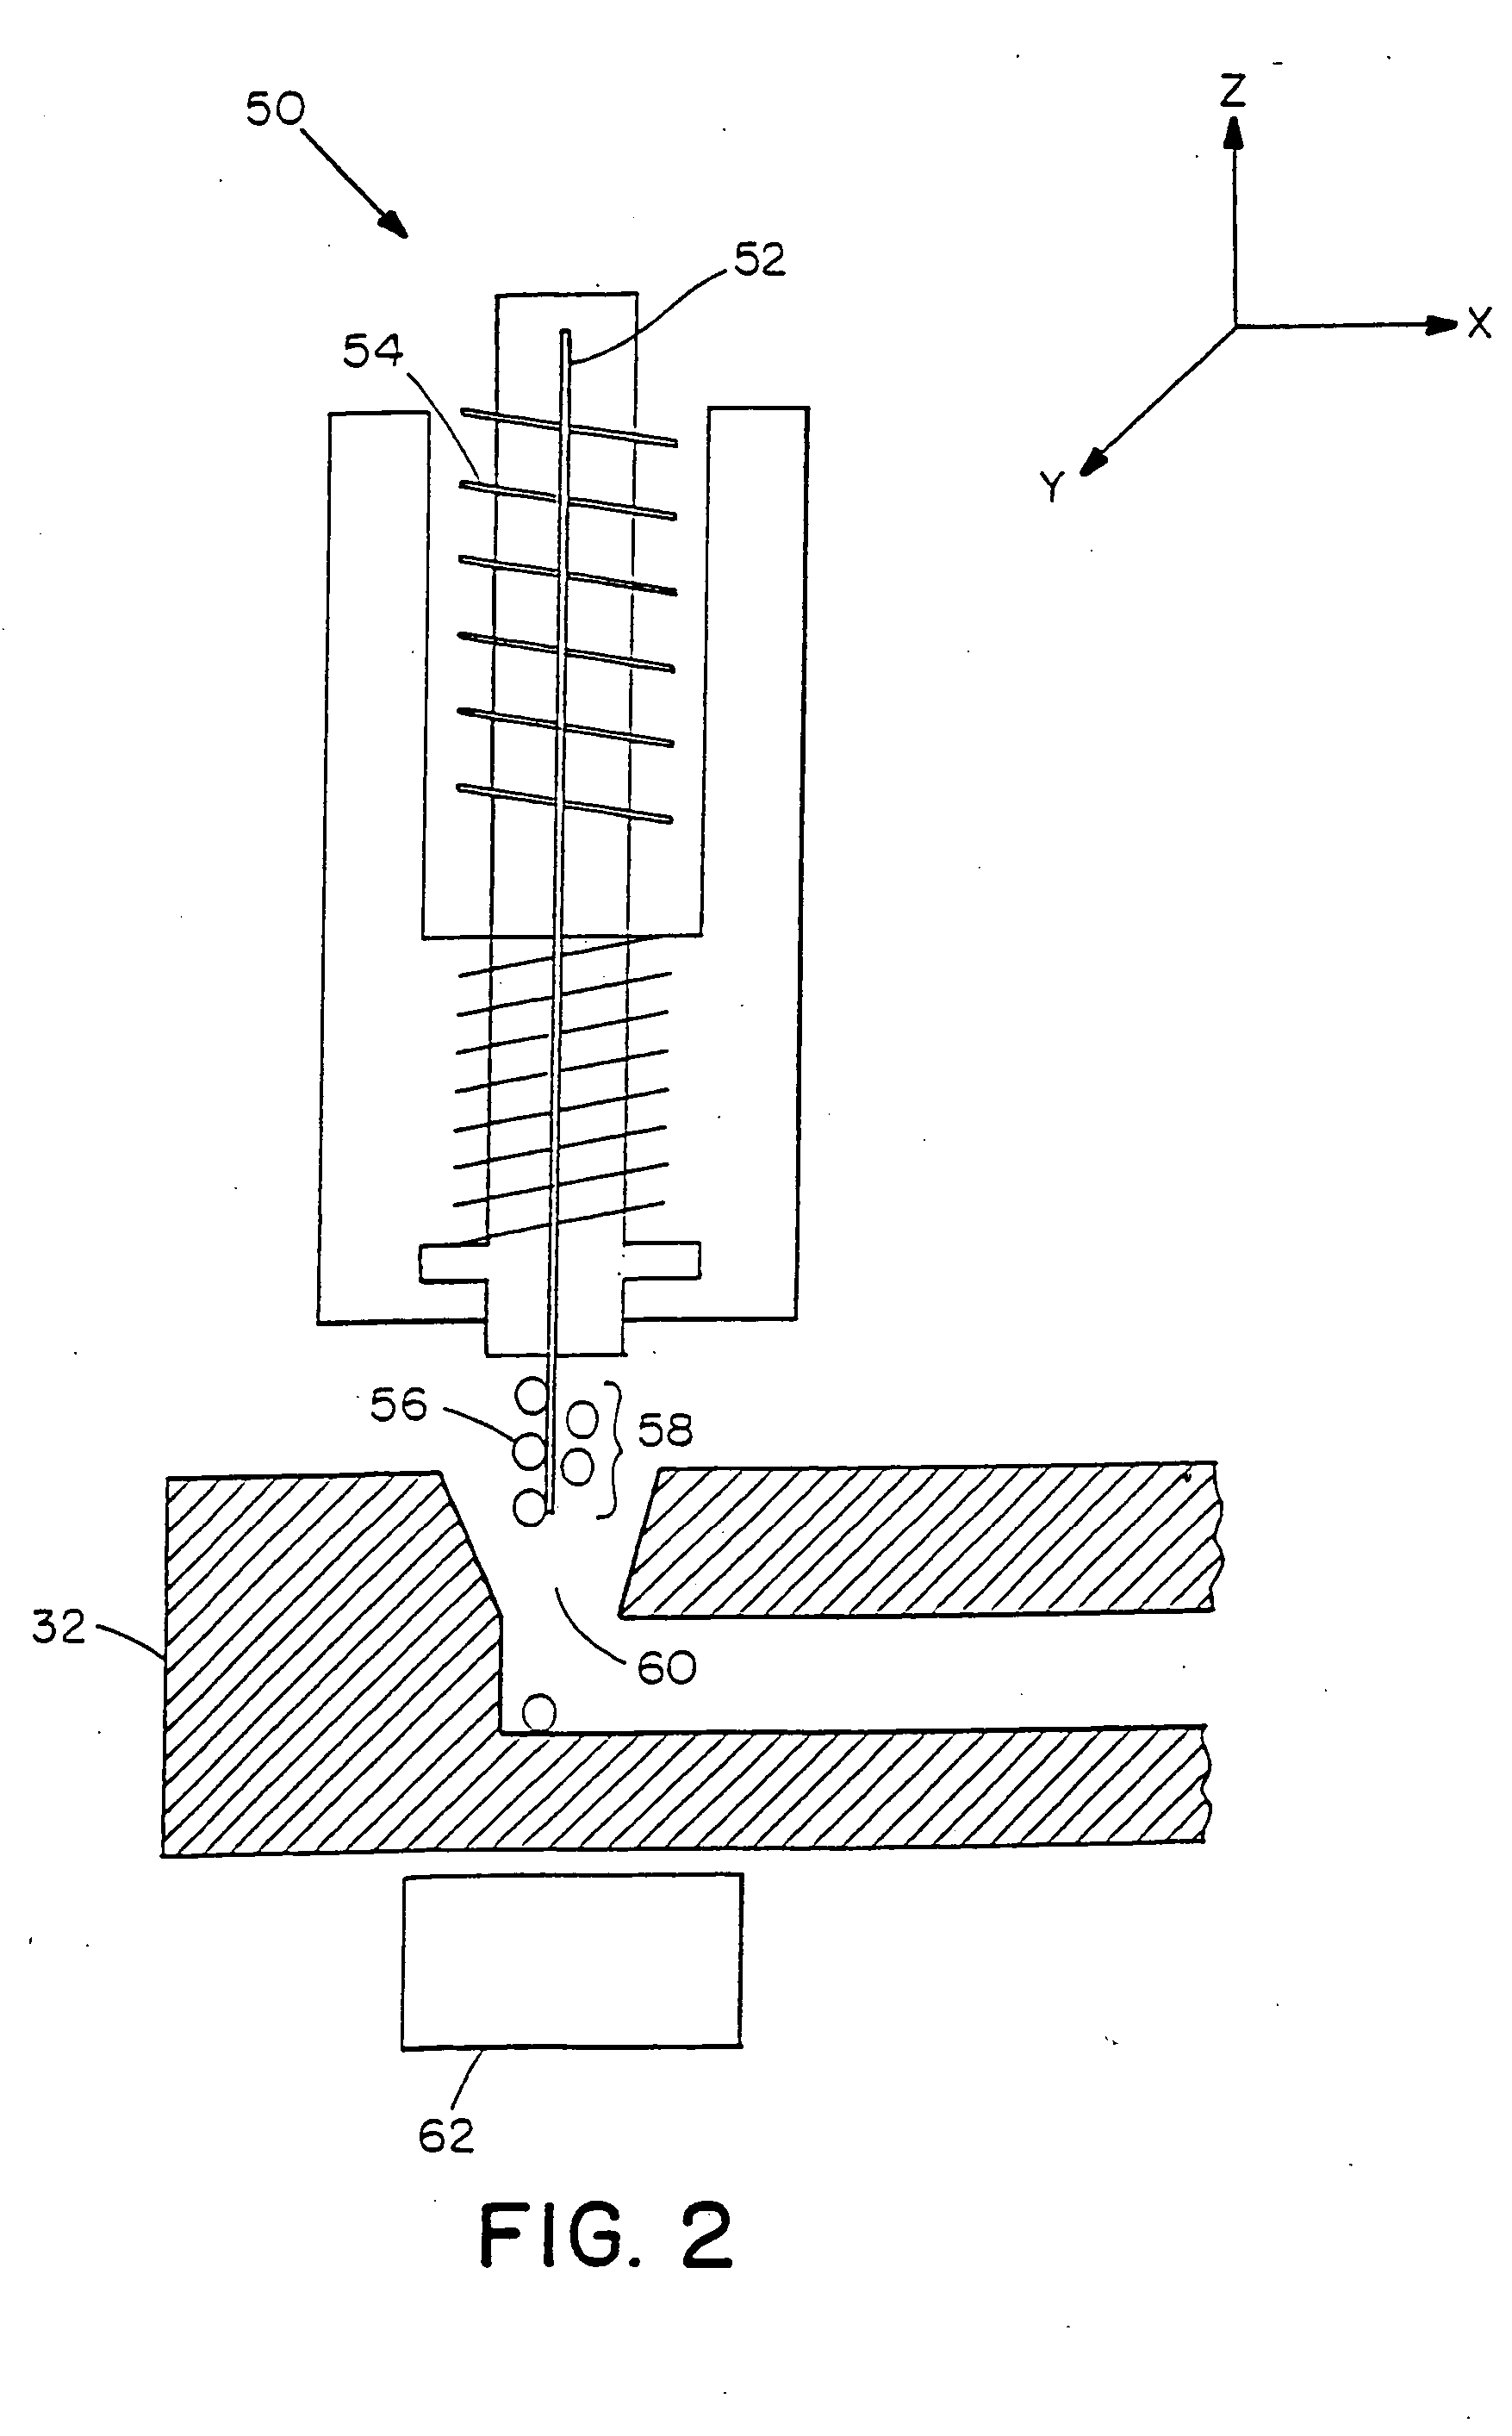 Methods and apparatus for processing a sample of biomolecular analyte using a microfabricated device